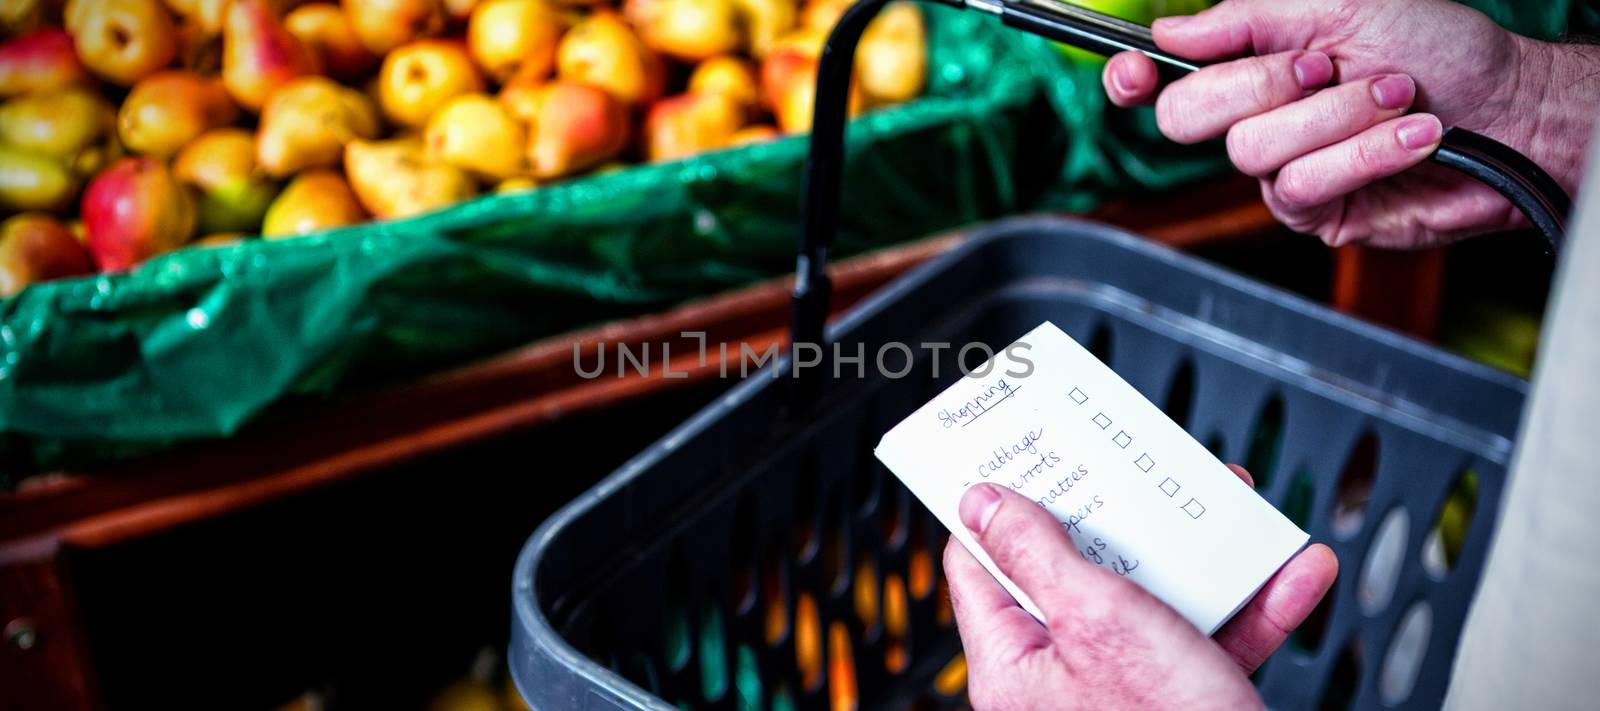 Man holding shopping basket and checklist in supermarket